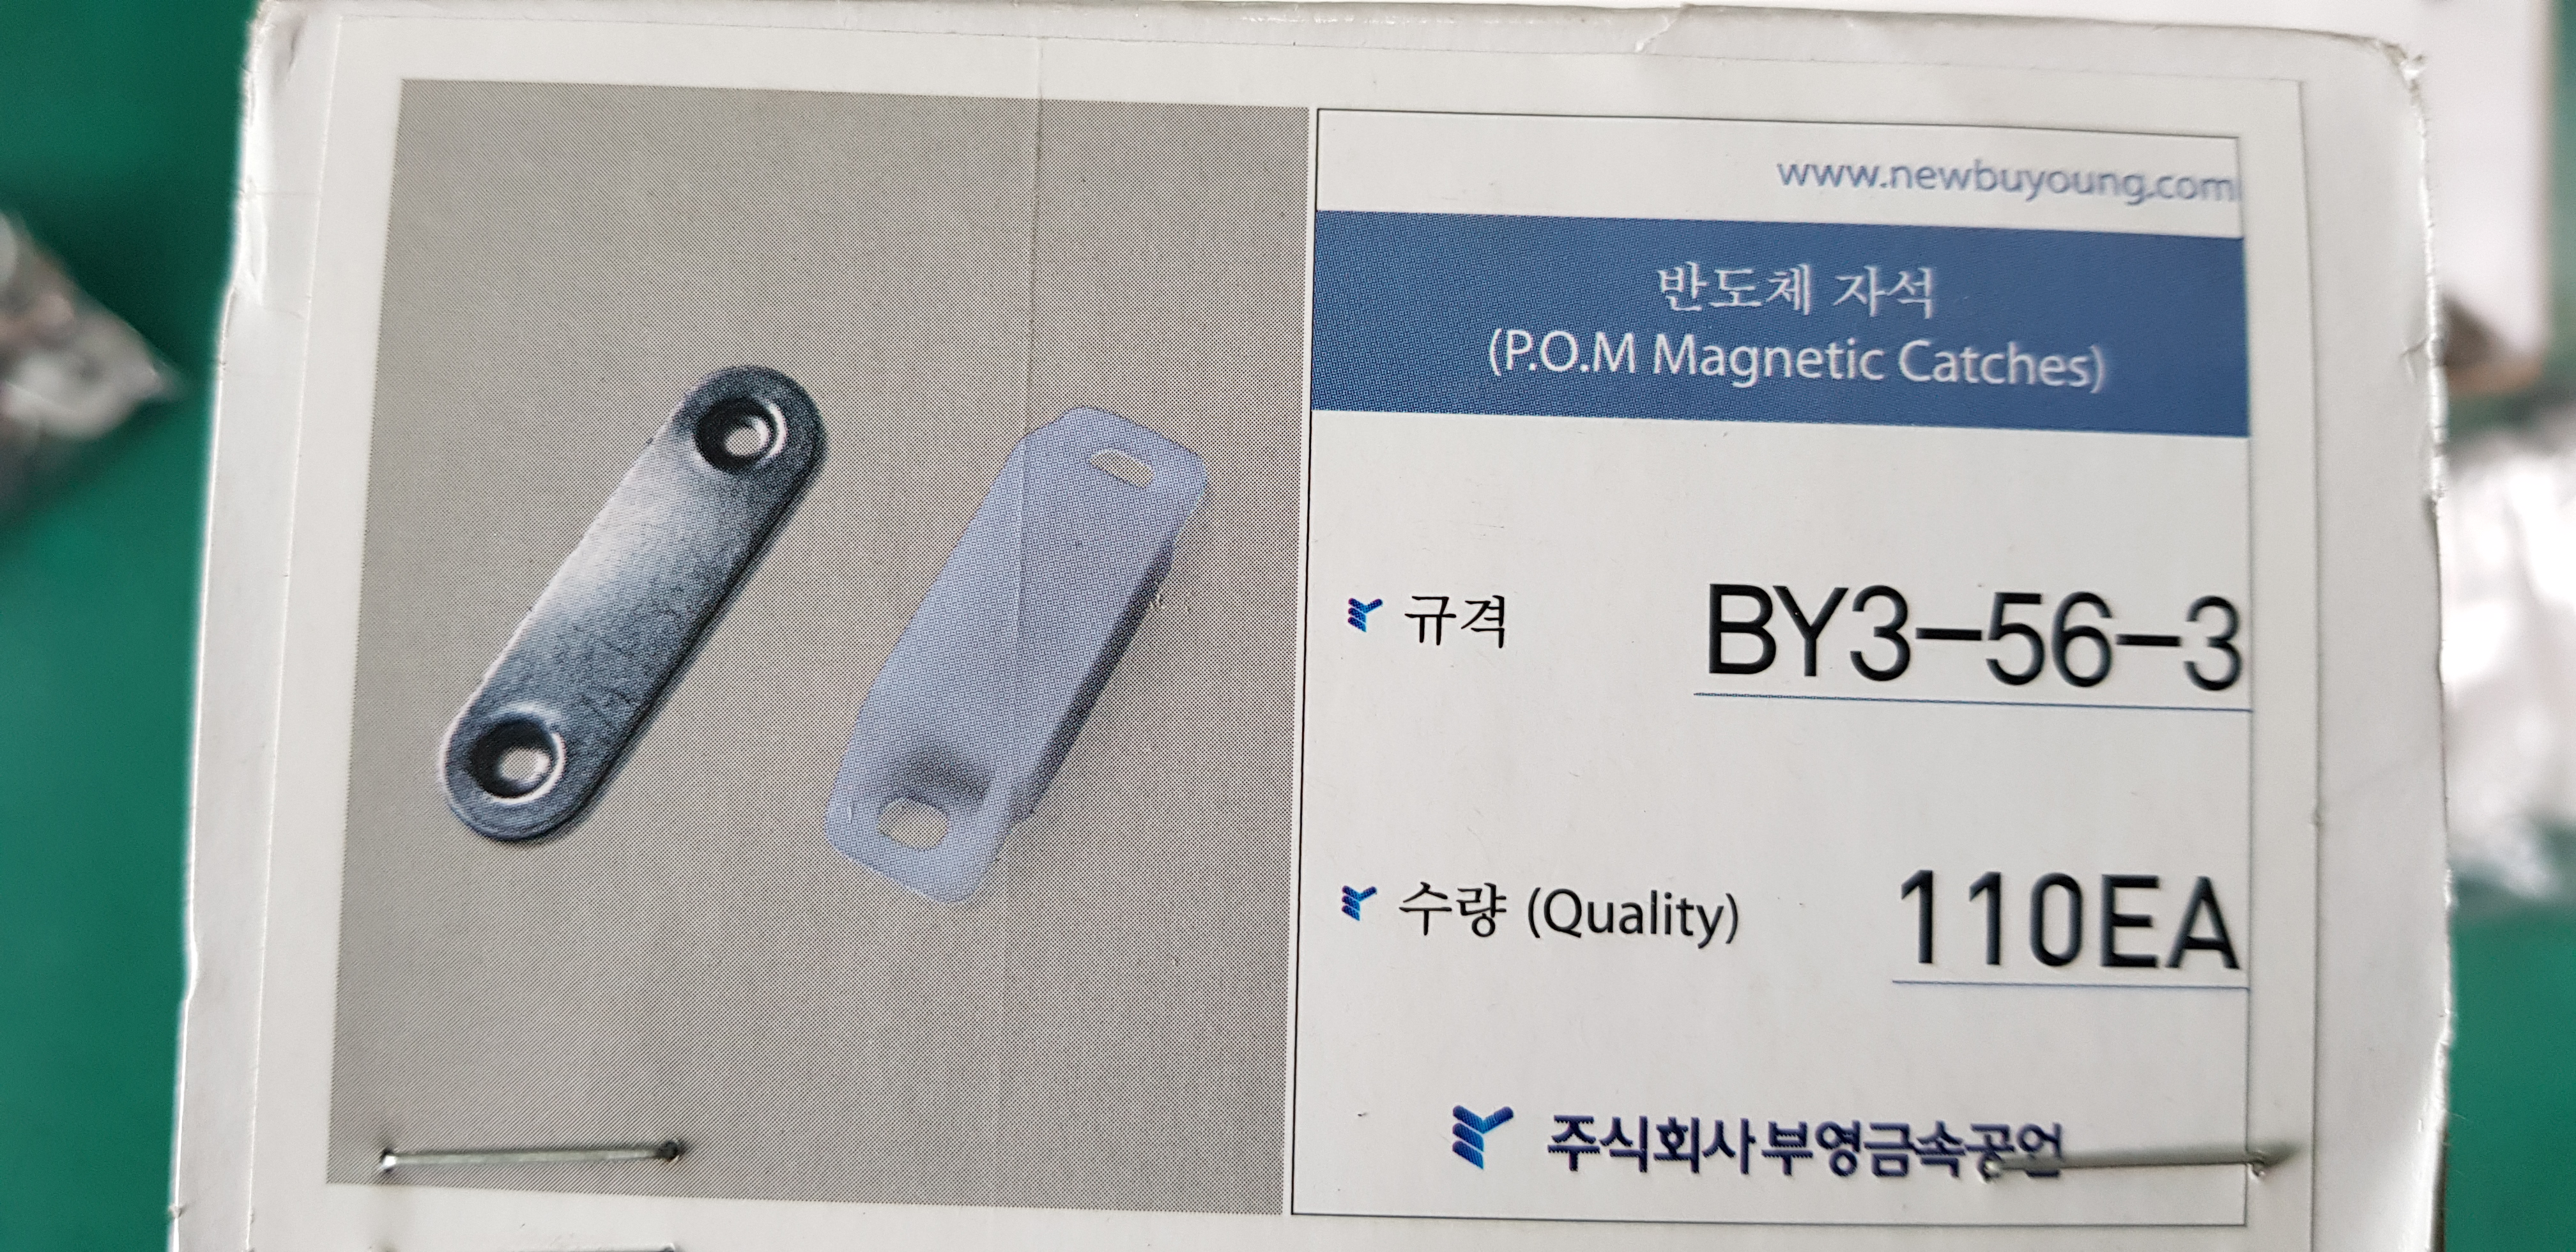 MAGNETIC CATCH BUYOUNG BY3-56-3 (A급-미사용품)